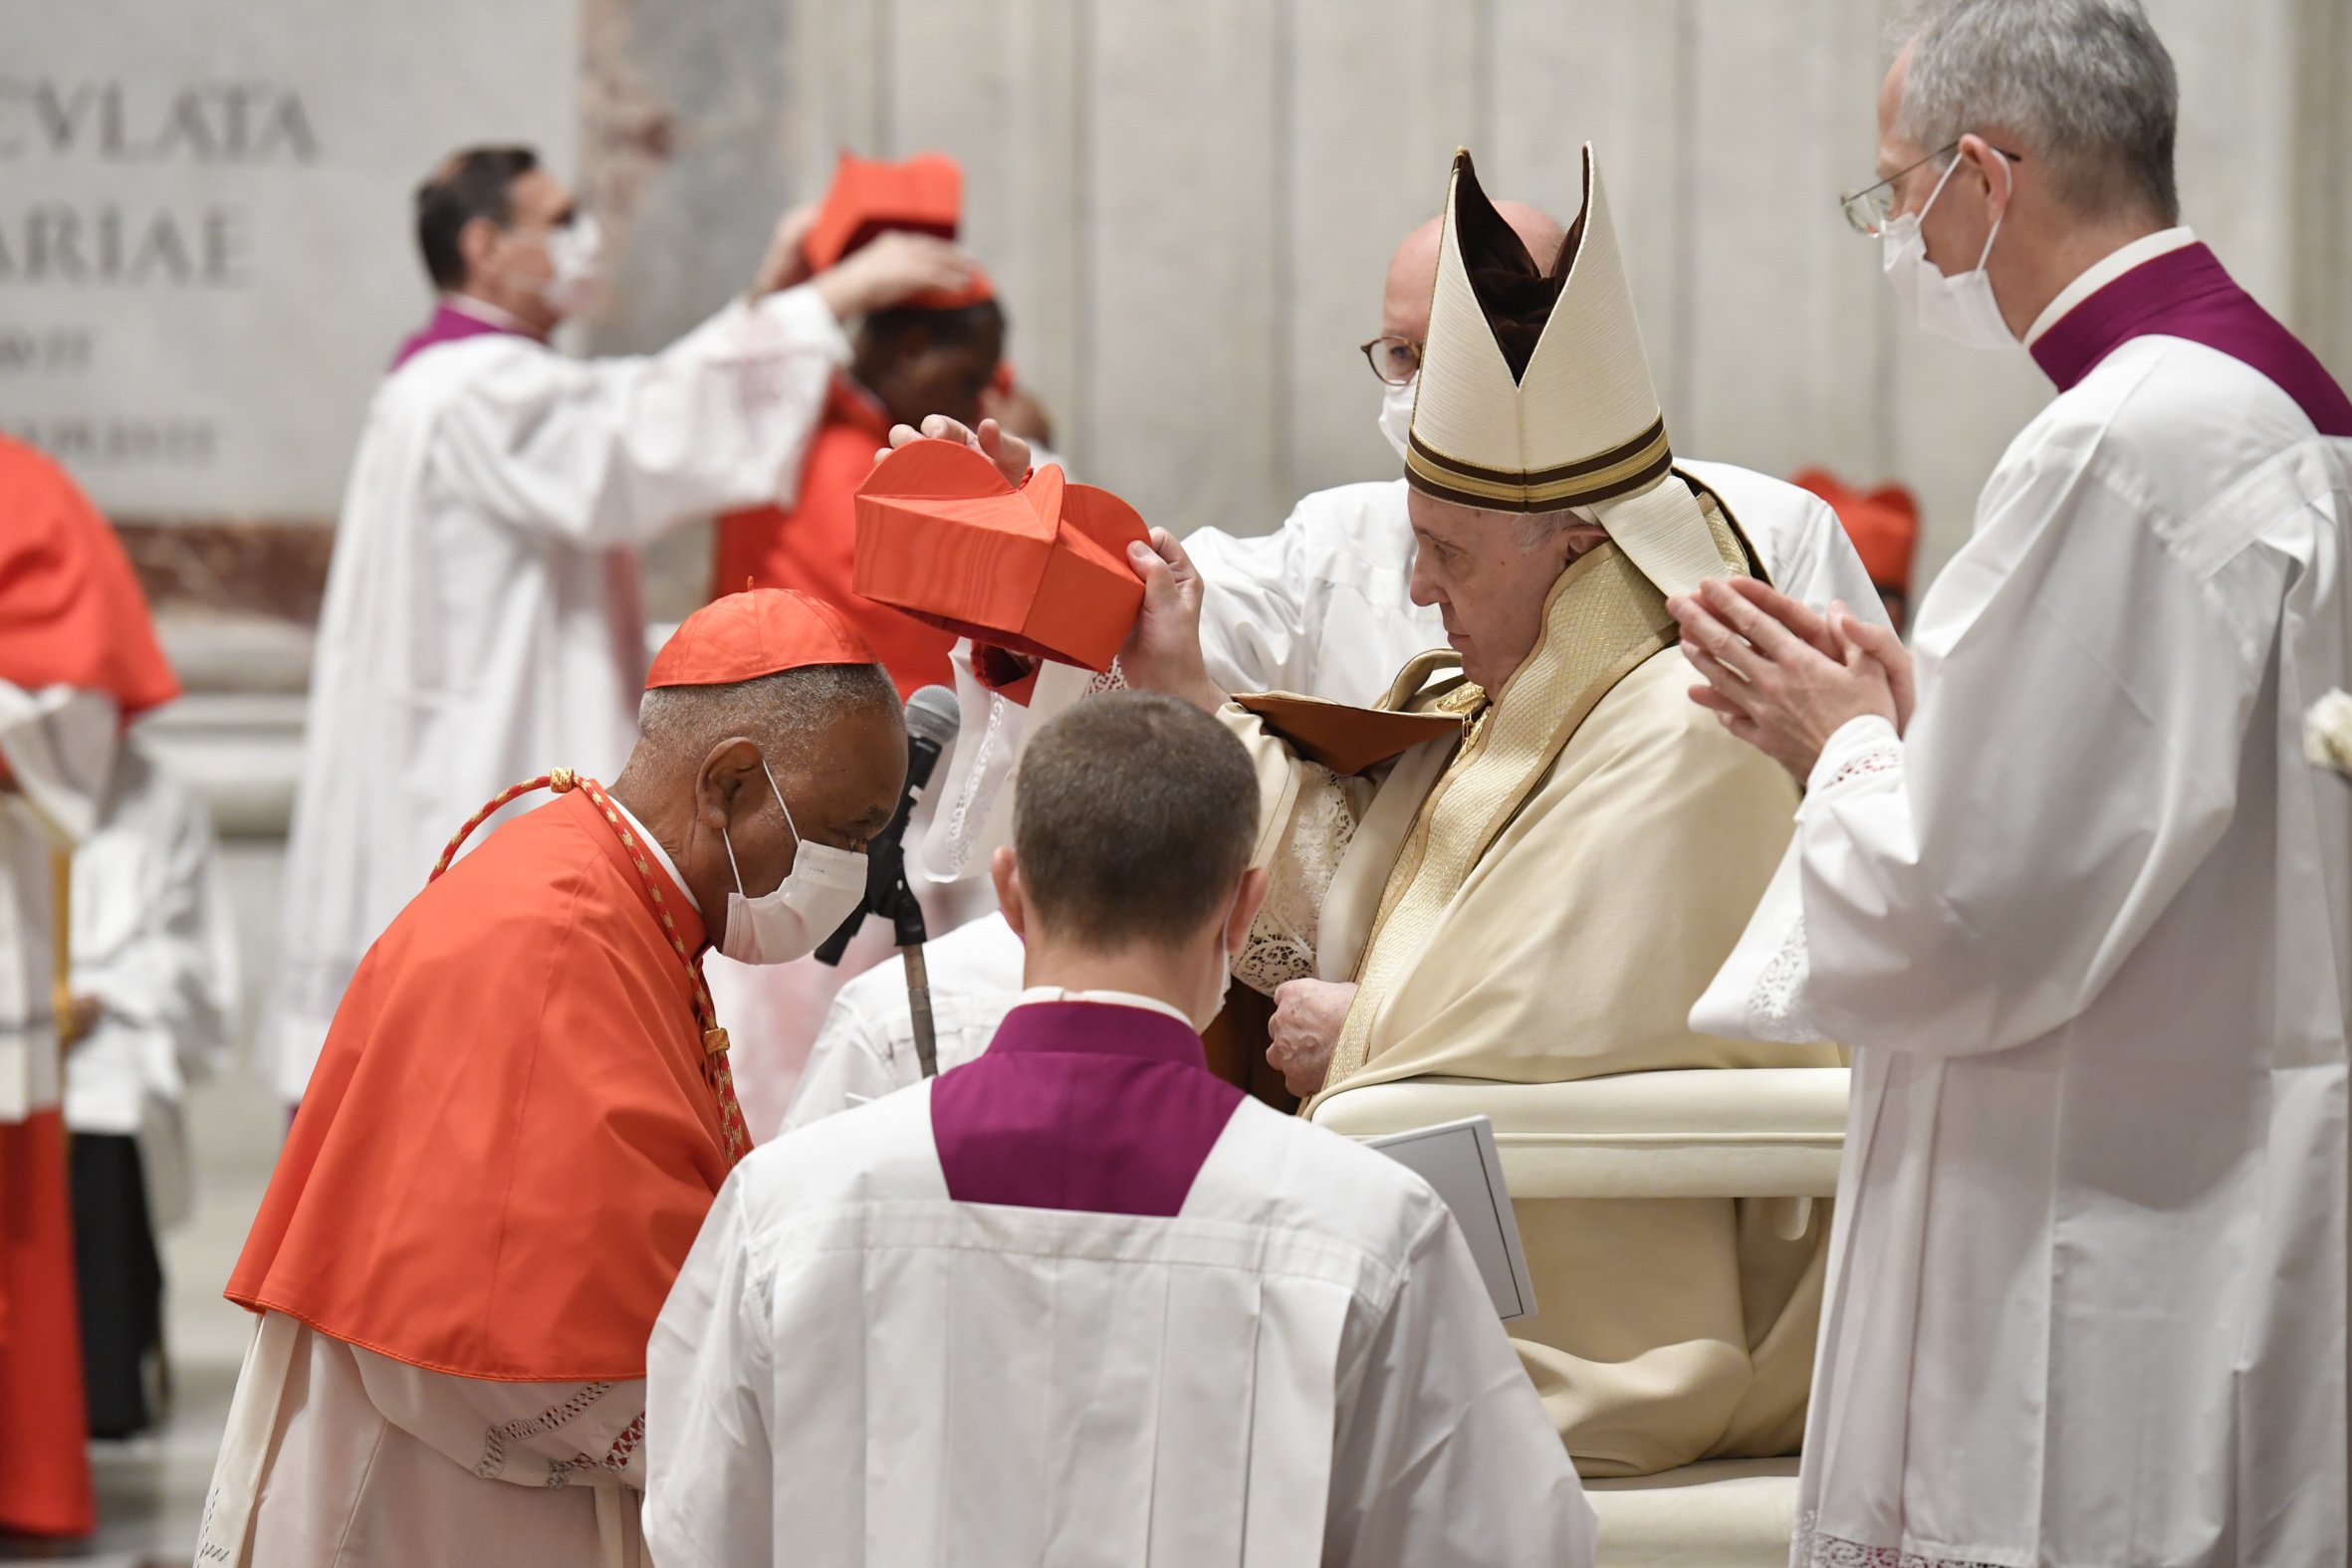 Cardinal Wilton Gregory of Washington among 13 new cardinals - 11 in-person  - made in pandemic-altered consistory - The Dialog